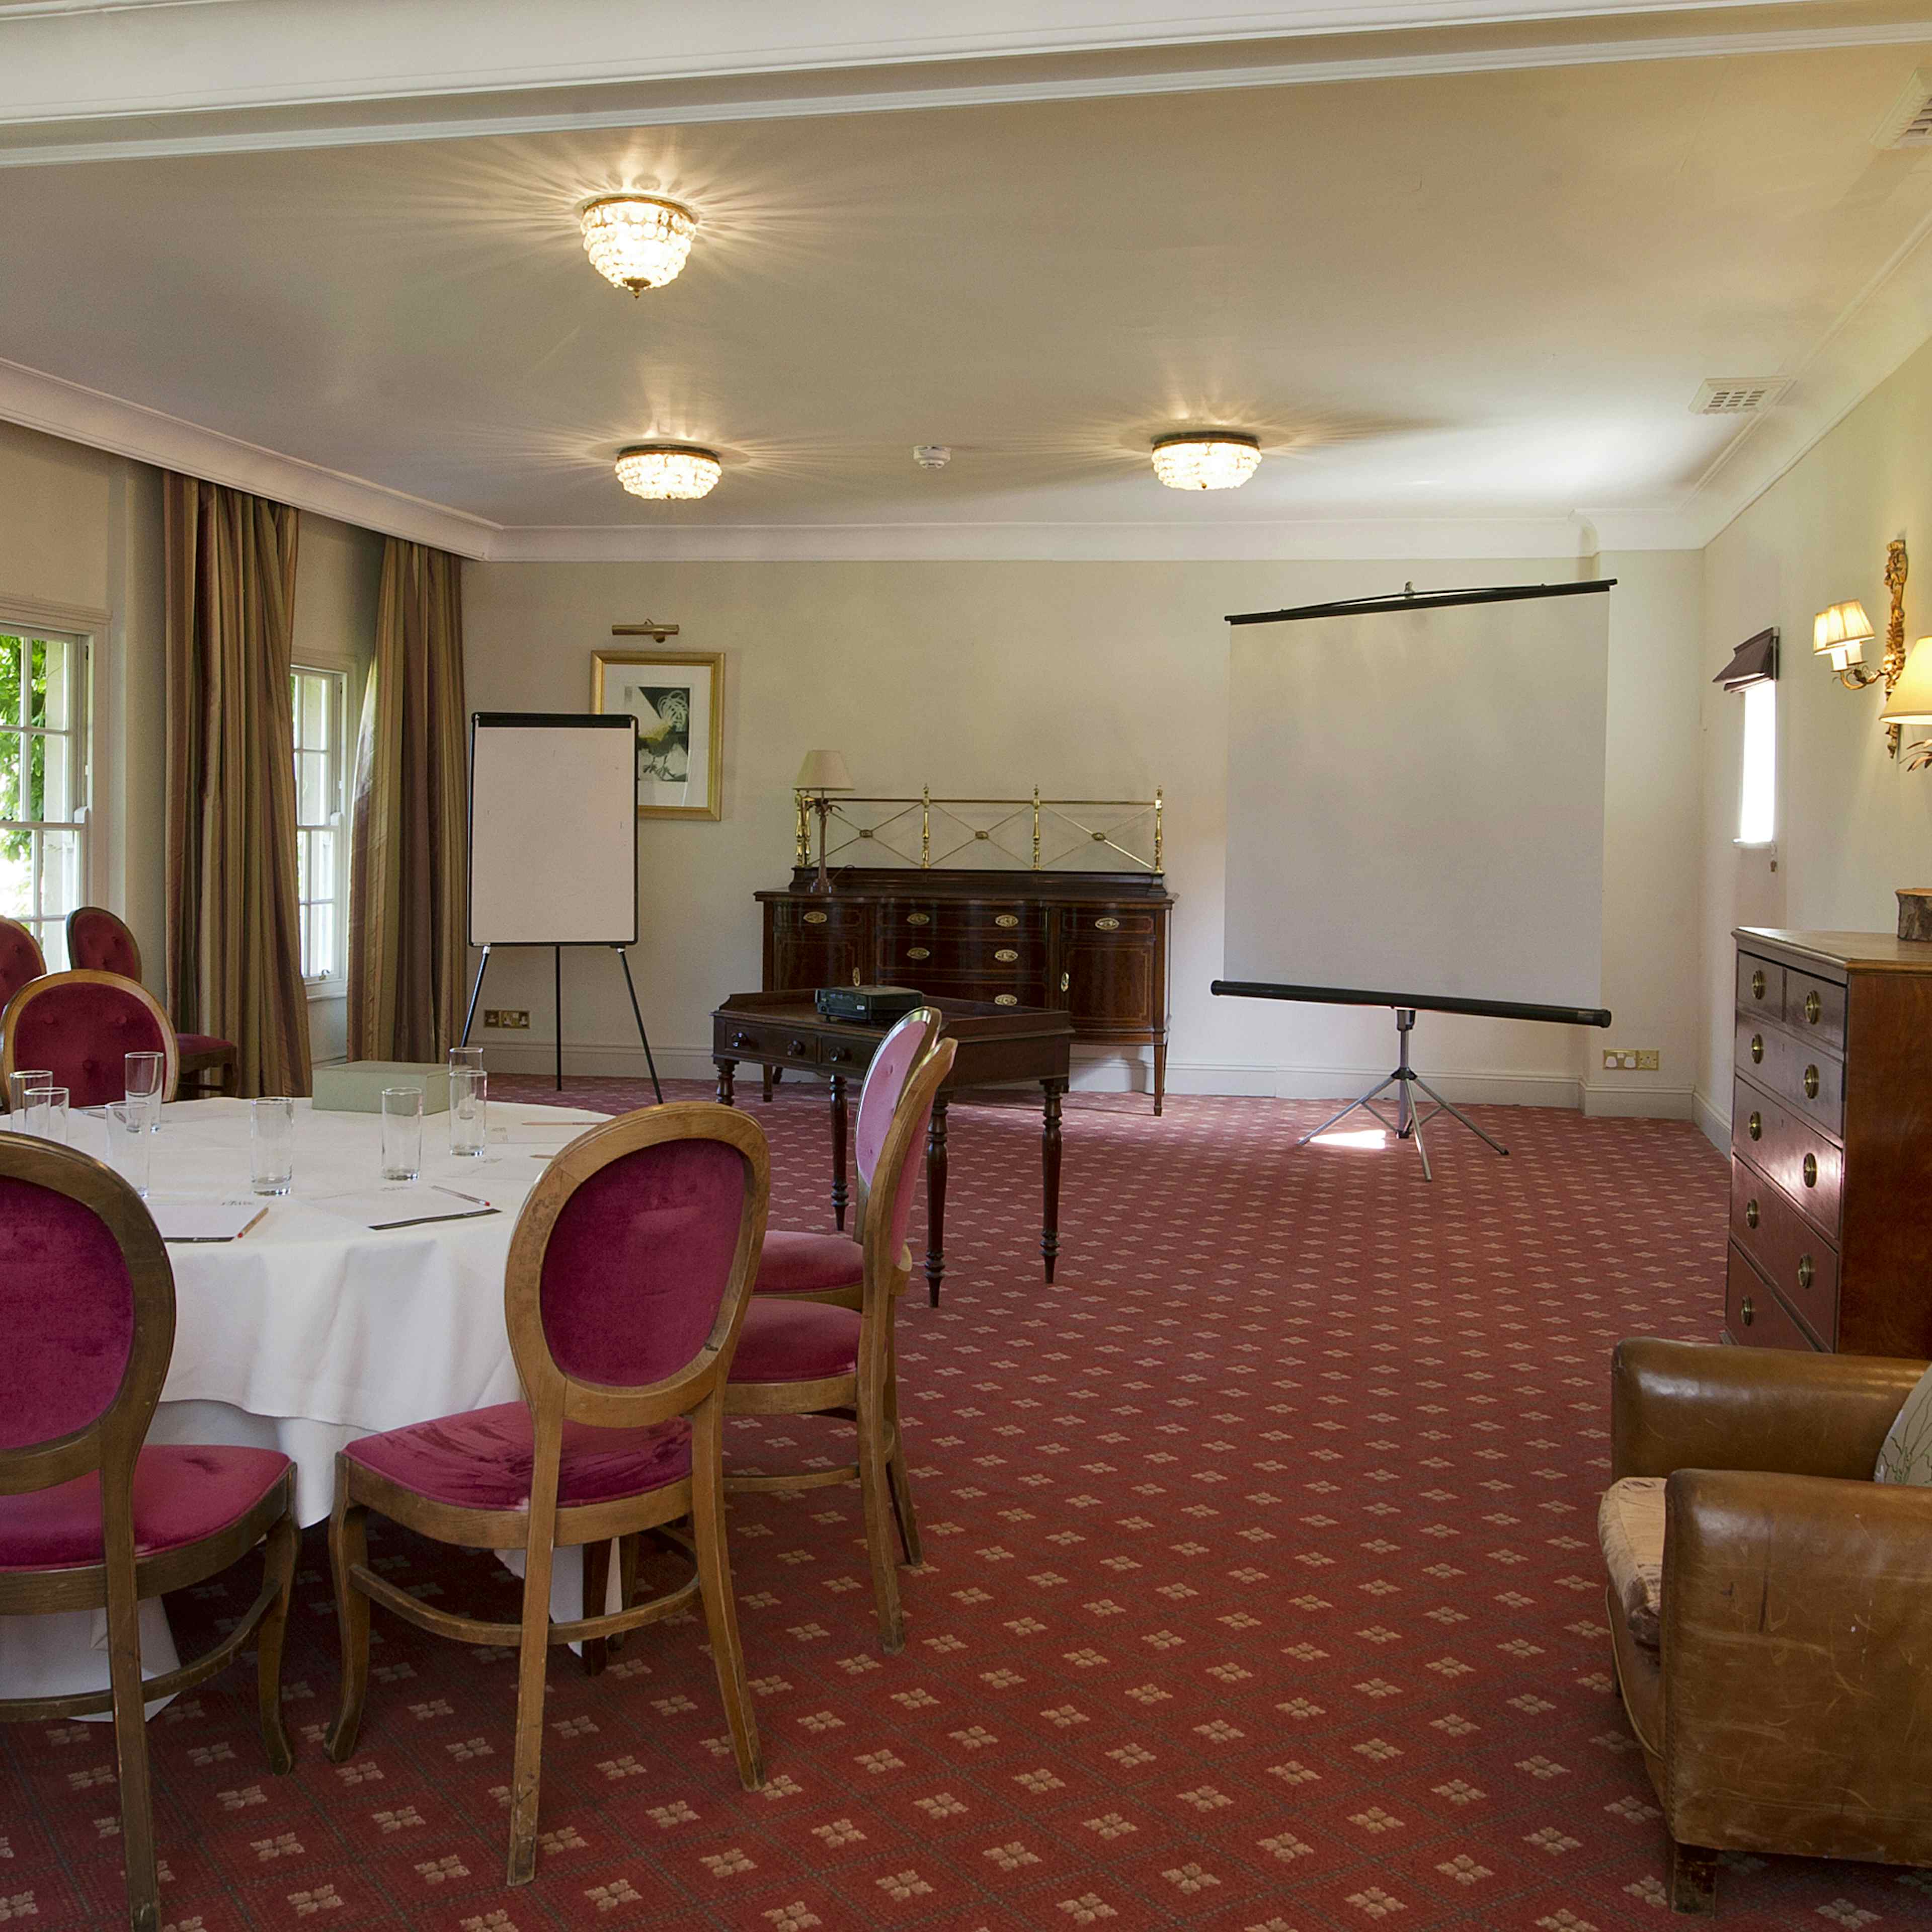 The Elms Hotel & Spa - The Abberley Suite image 1